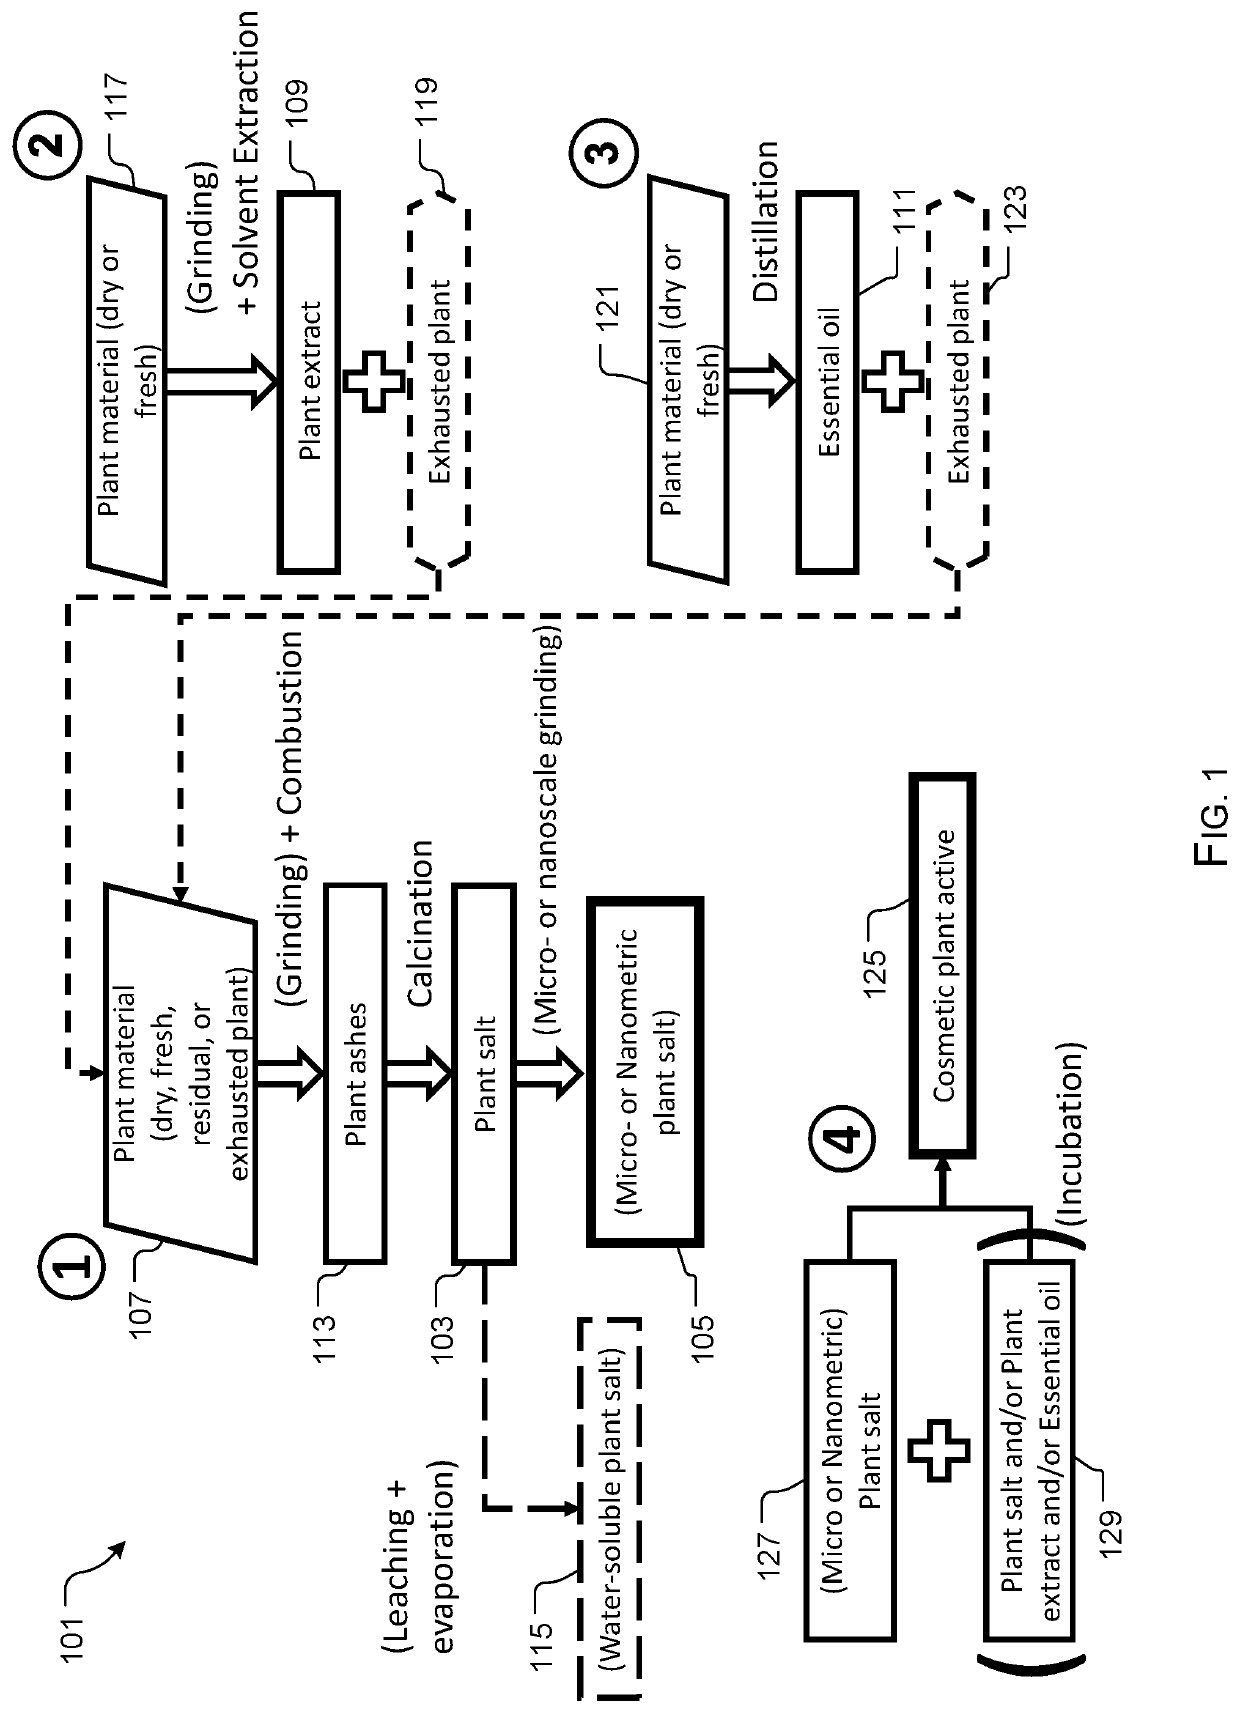 Process for preparing potent plant based cosmetic actives and application to an antiperspirant active